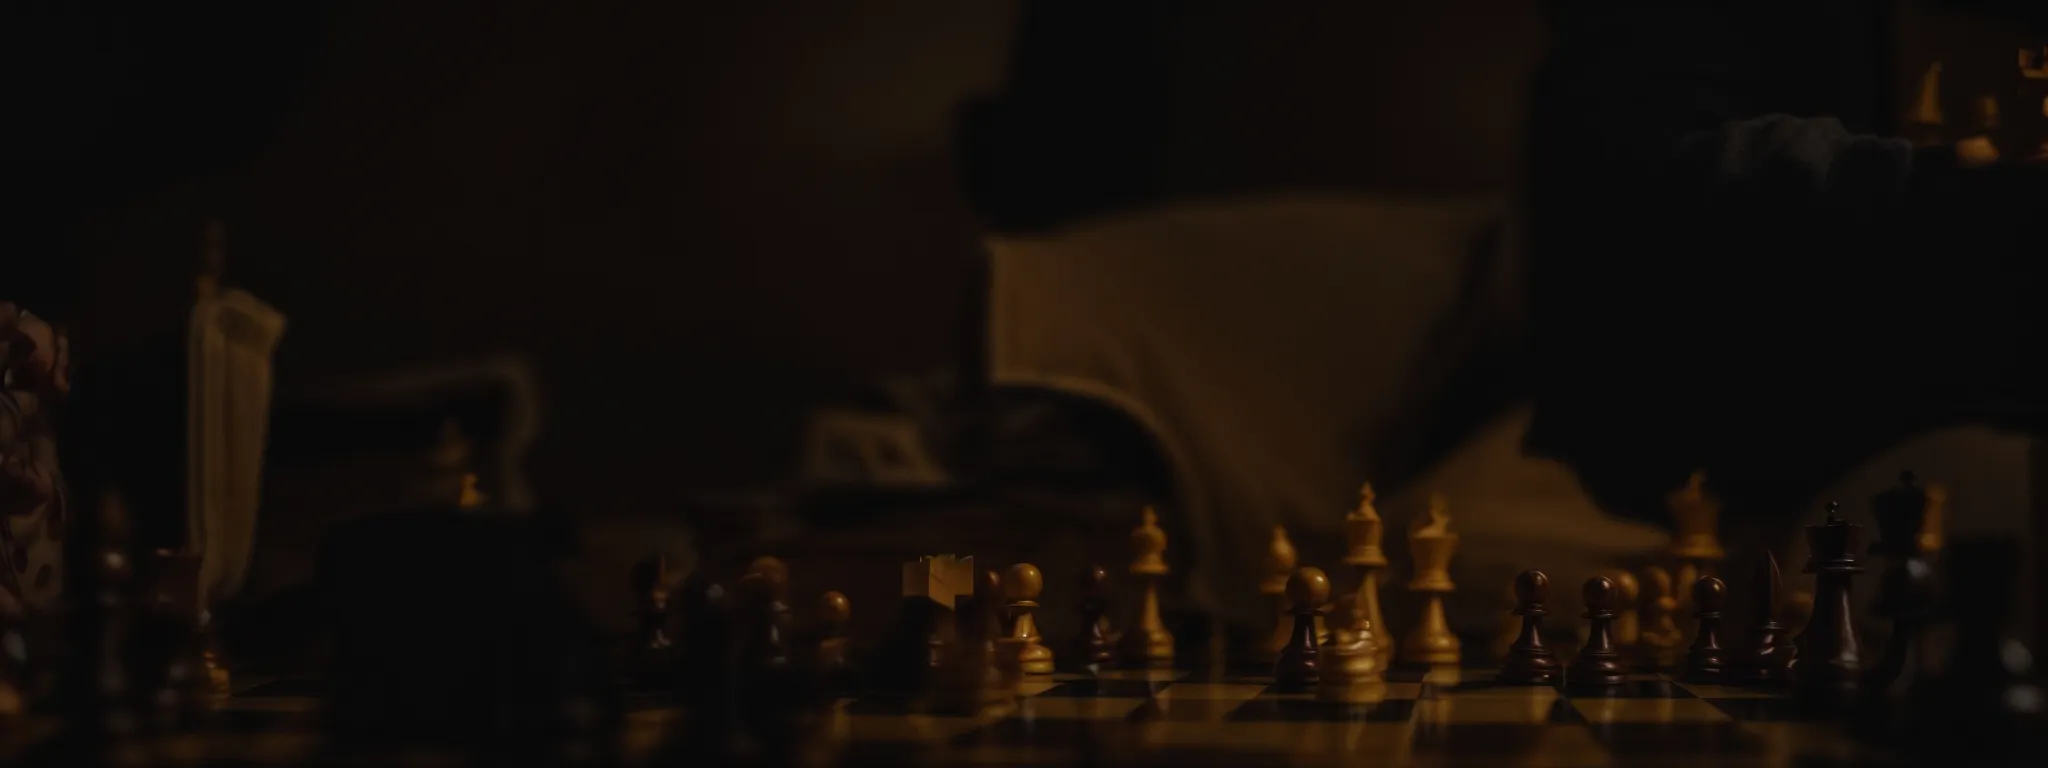 a person thoughtfully arranging chess pieces on a board under spotlights.